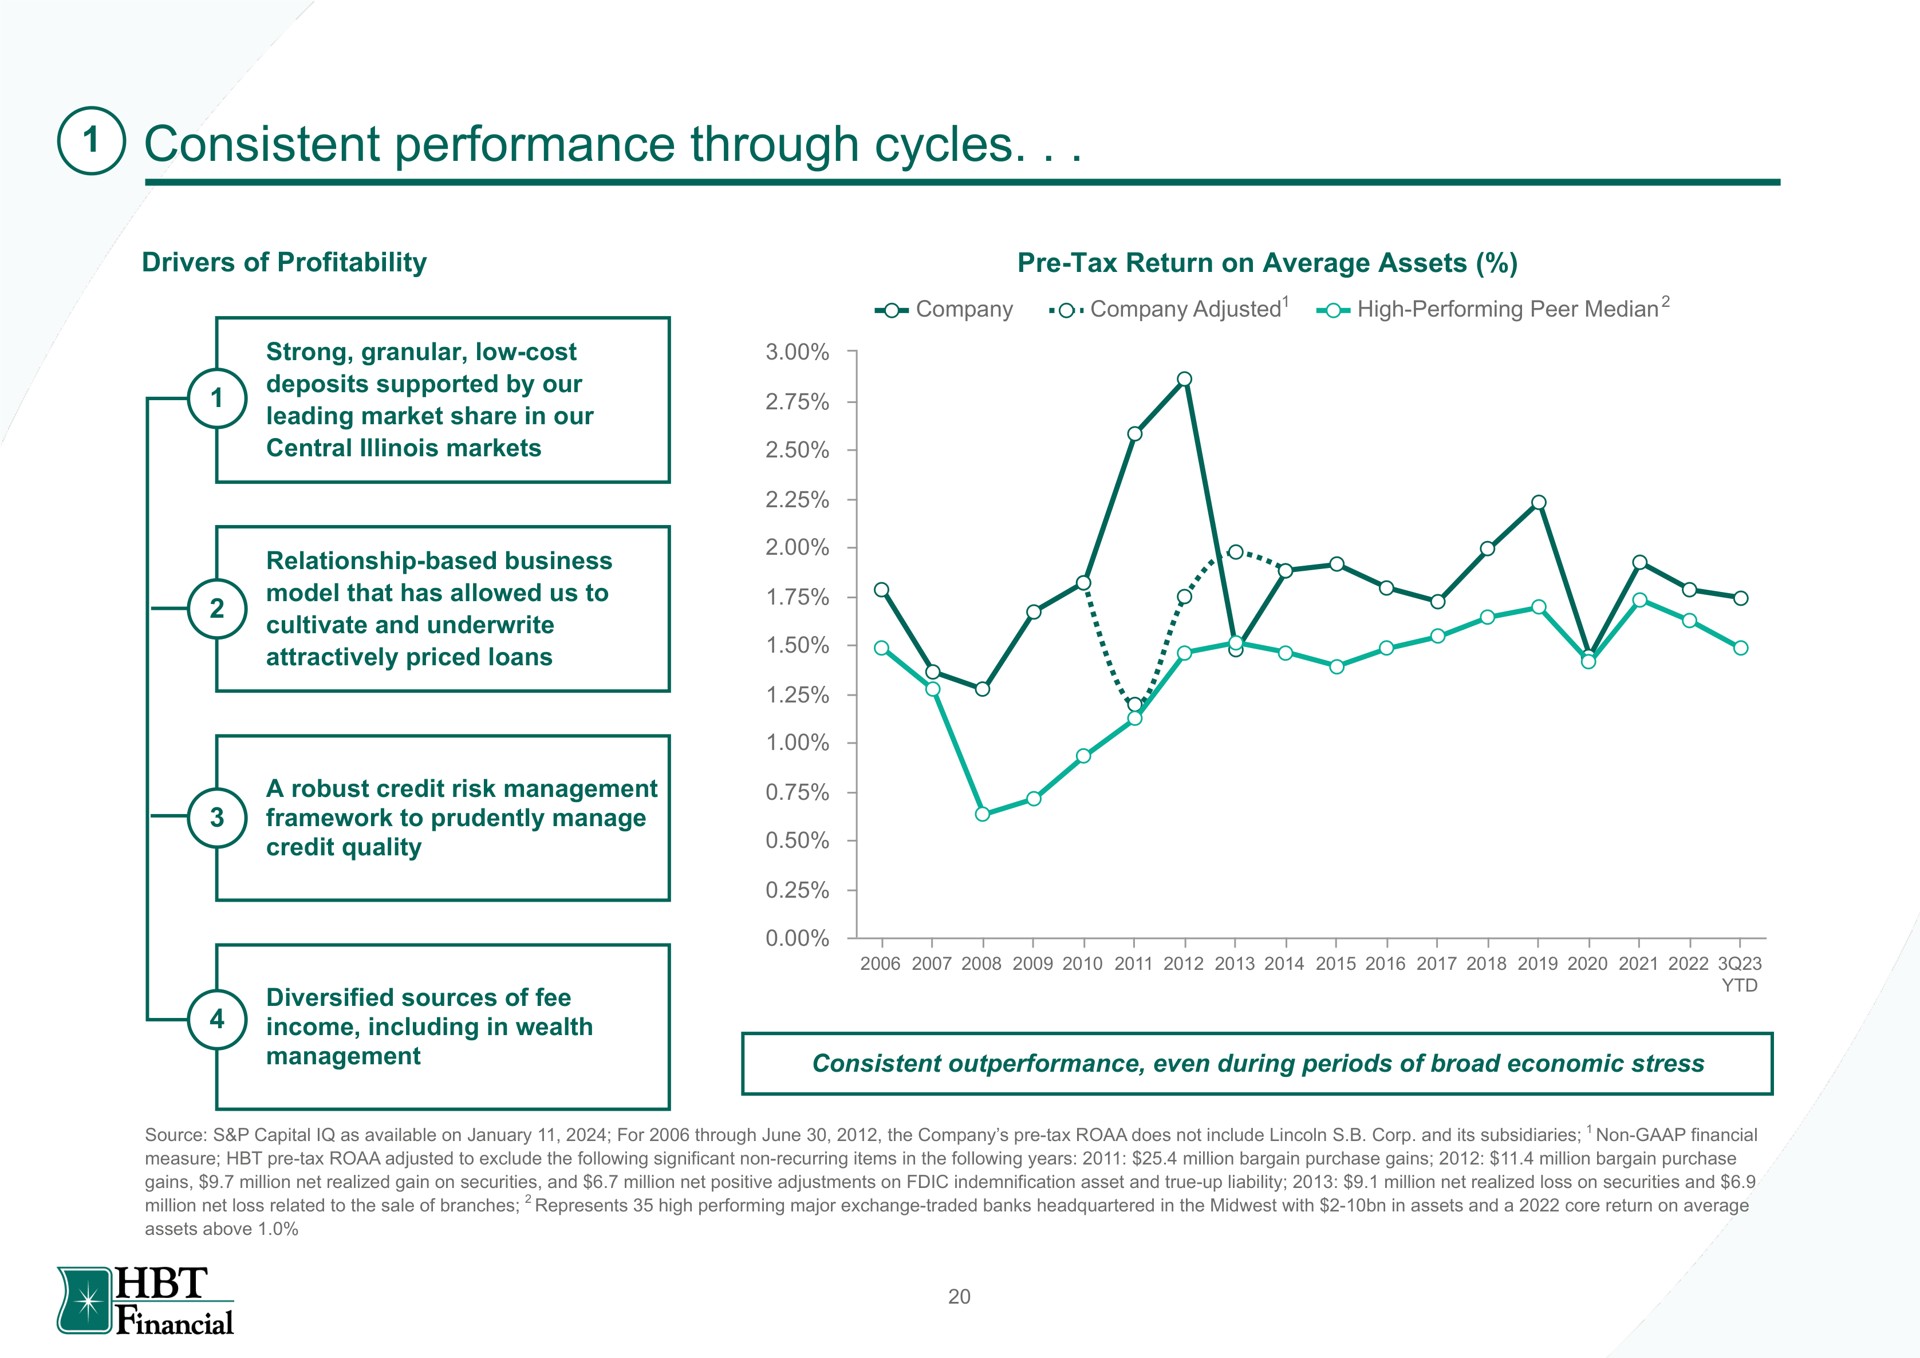 consistent performance through cycles | HBT Financial